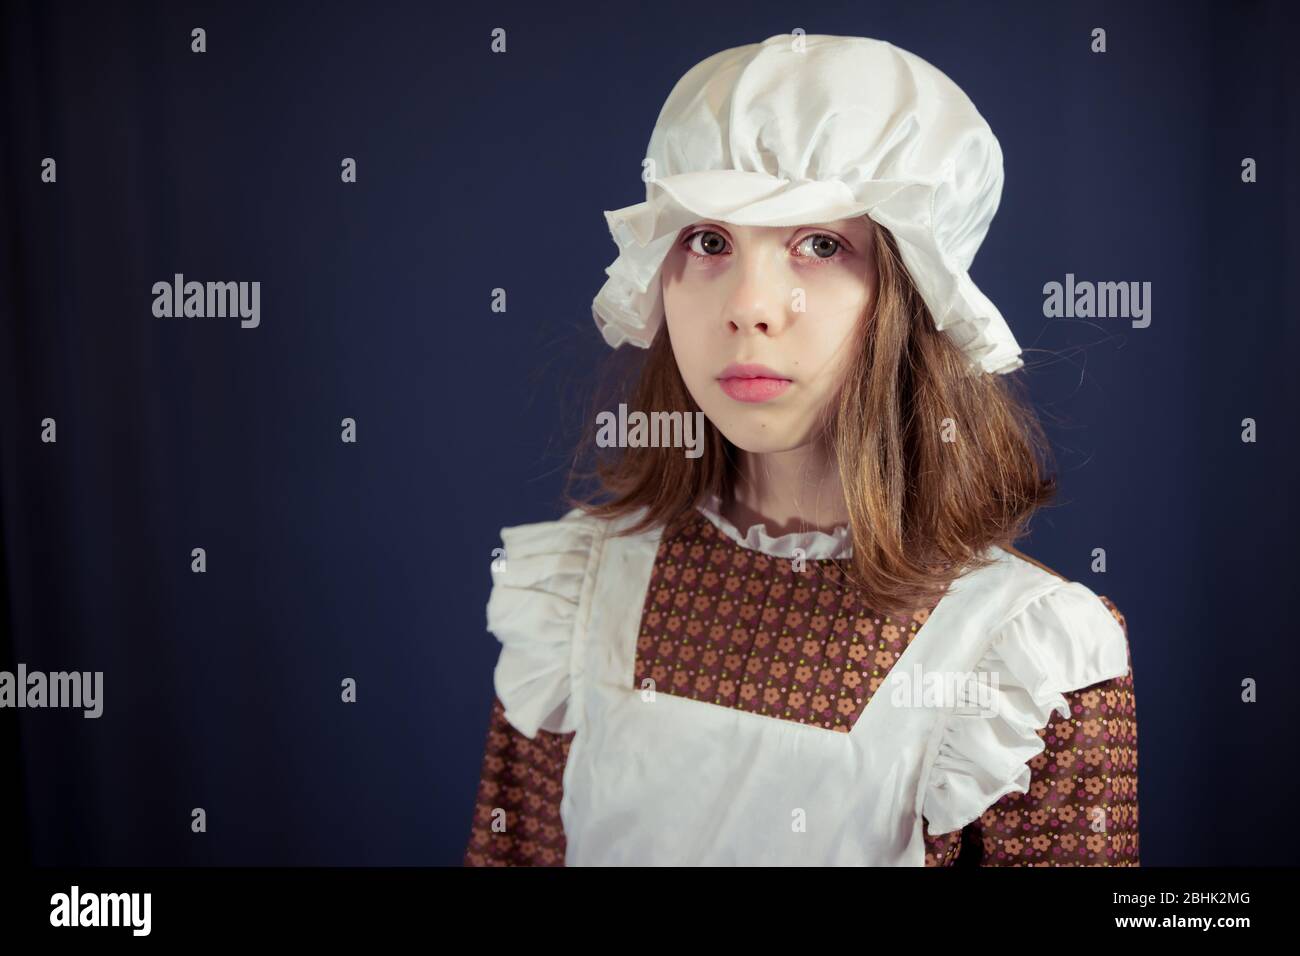 Sad girl in Victorian maid outfit with cap and apron Stock Photo